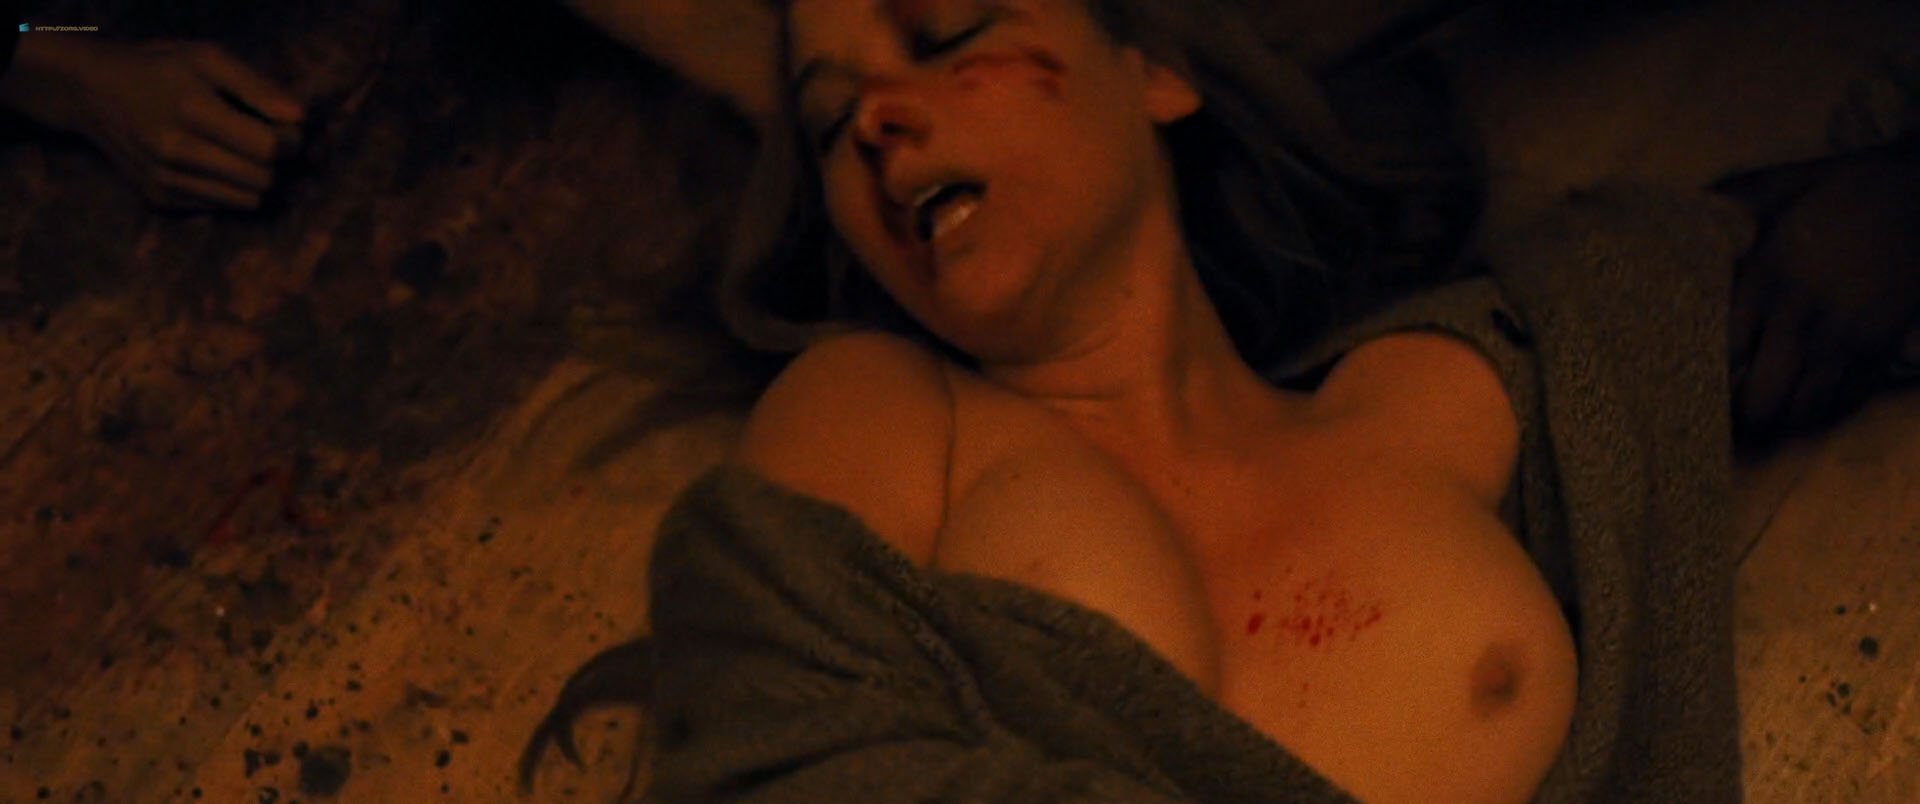 best of Boobs nude jennifer mother lawrence